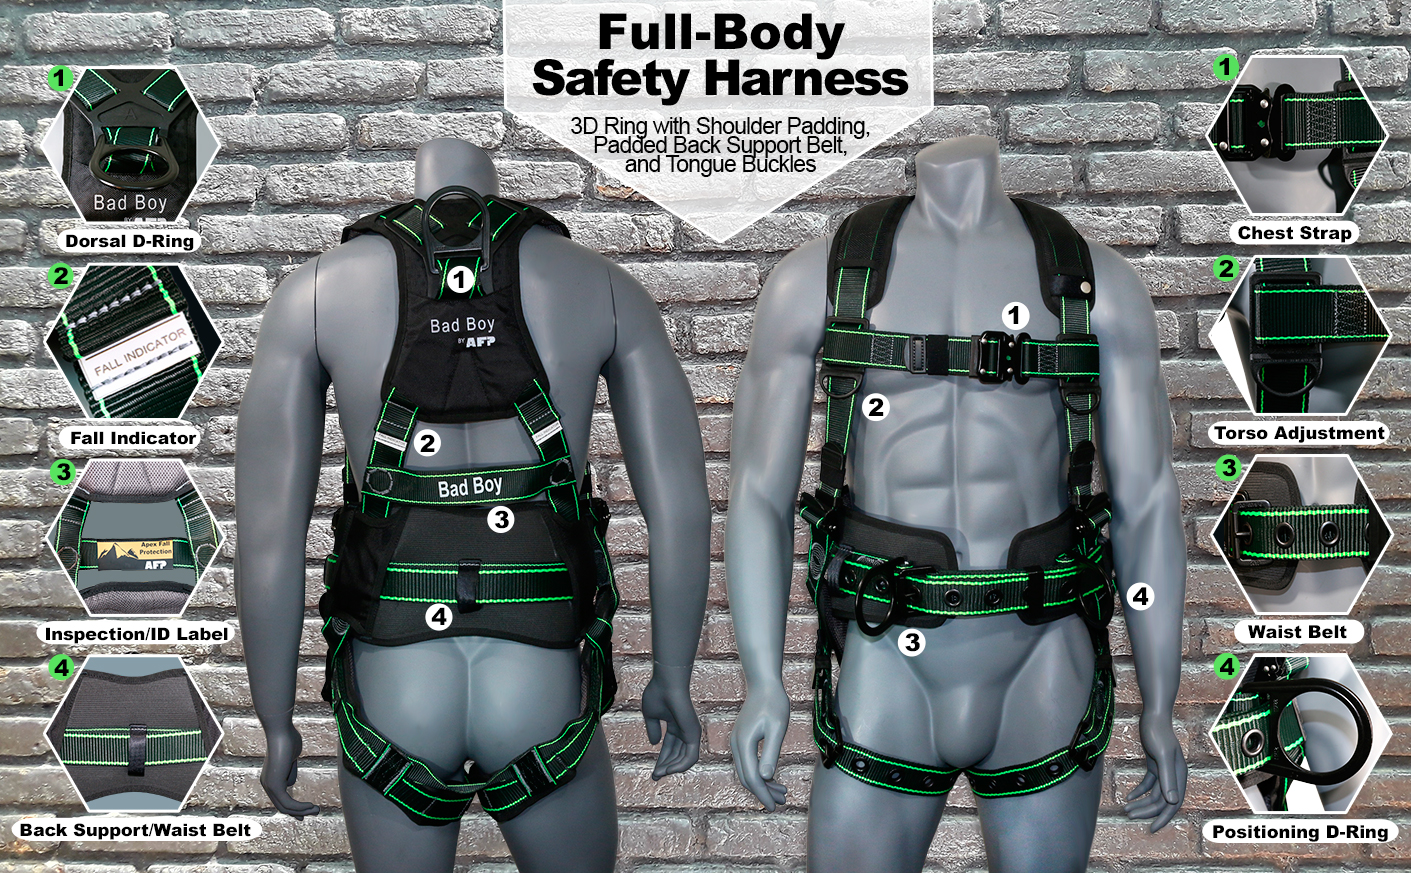 AFP Fall Protection Premium Black Safety Harness w/ Hi-Viz Lime Stitches, Vented & Padded Shoulder, Legs and Back, 8” Thick Back Support Belt, 3 D-Rings, Tongue Buckle, Quick Release (OSHA/ANSI PPE) Quick One Safety